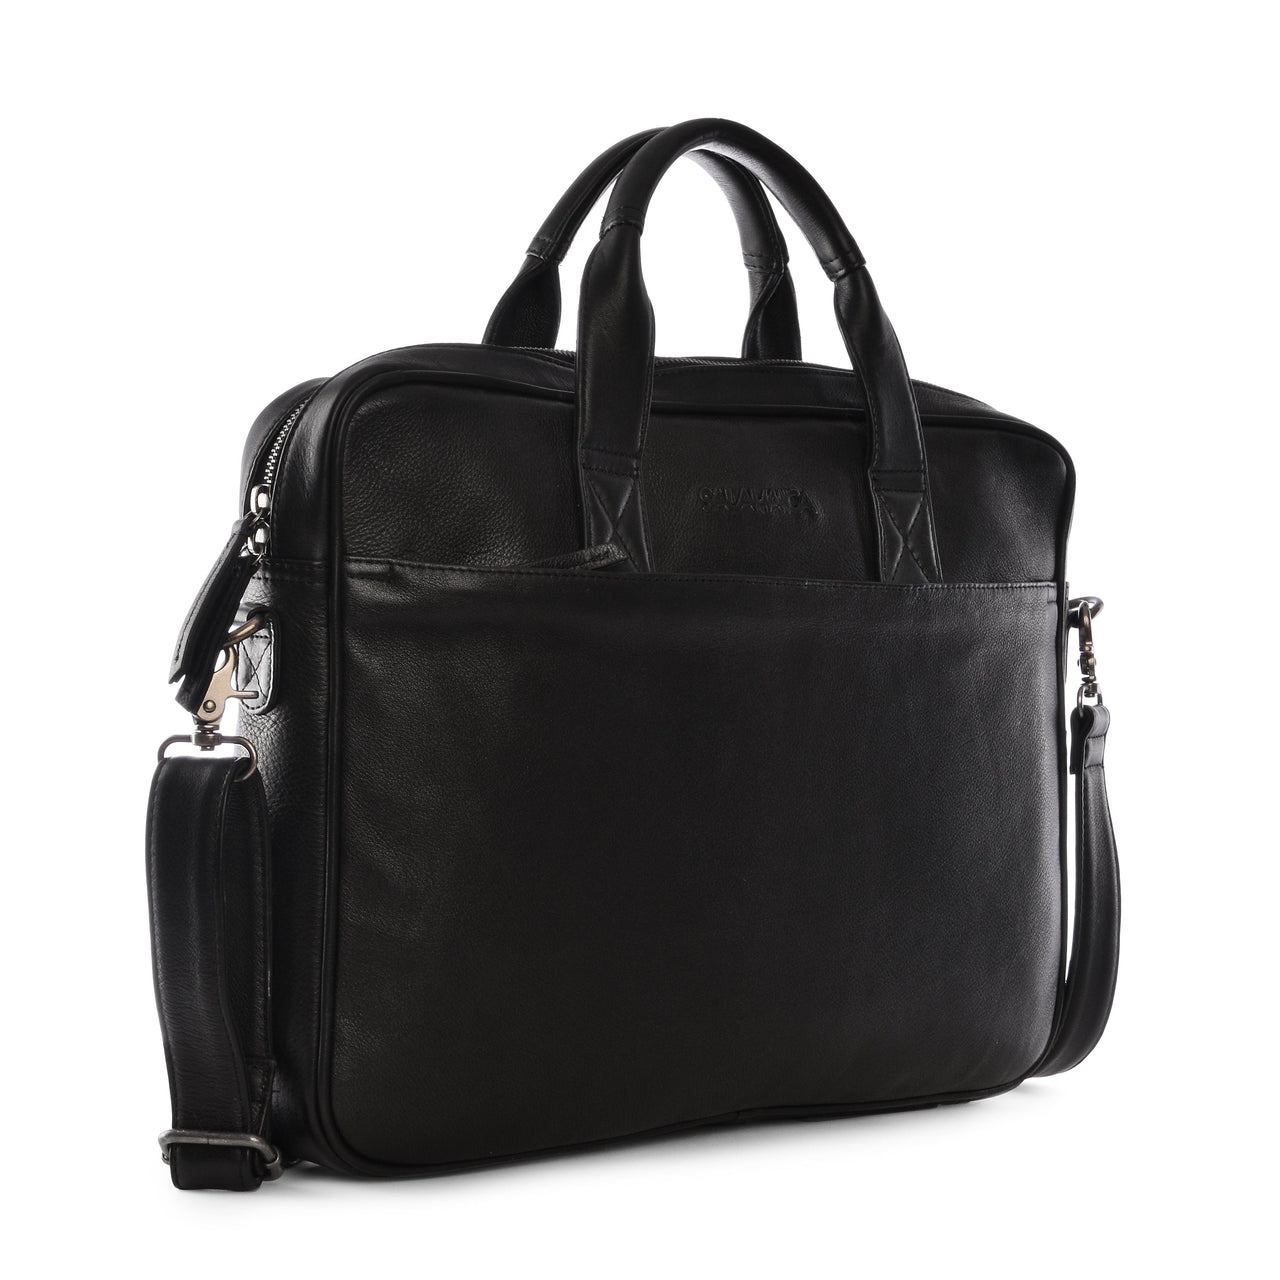 Haskell Business Bag - Laptop Bags